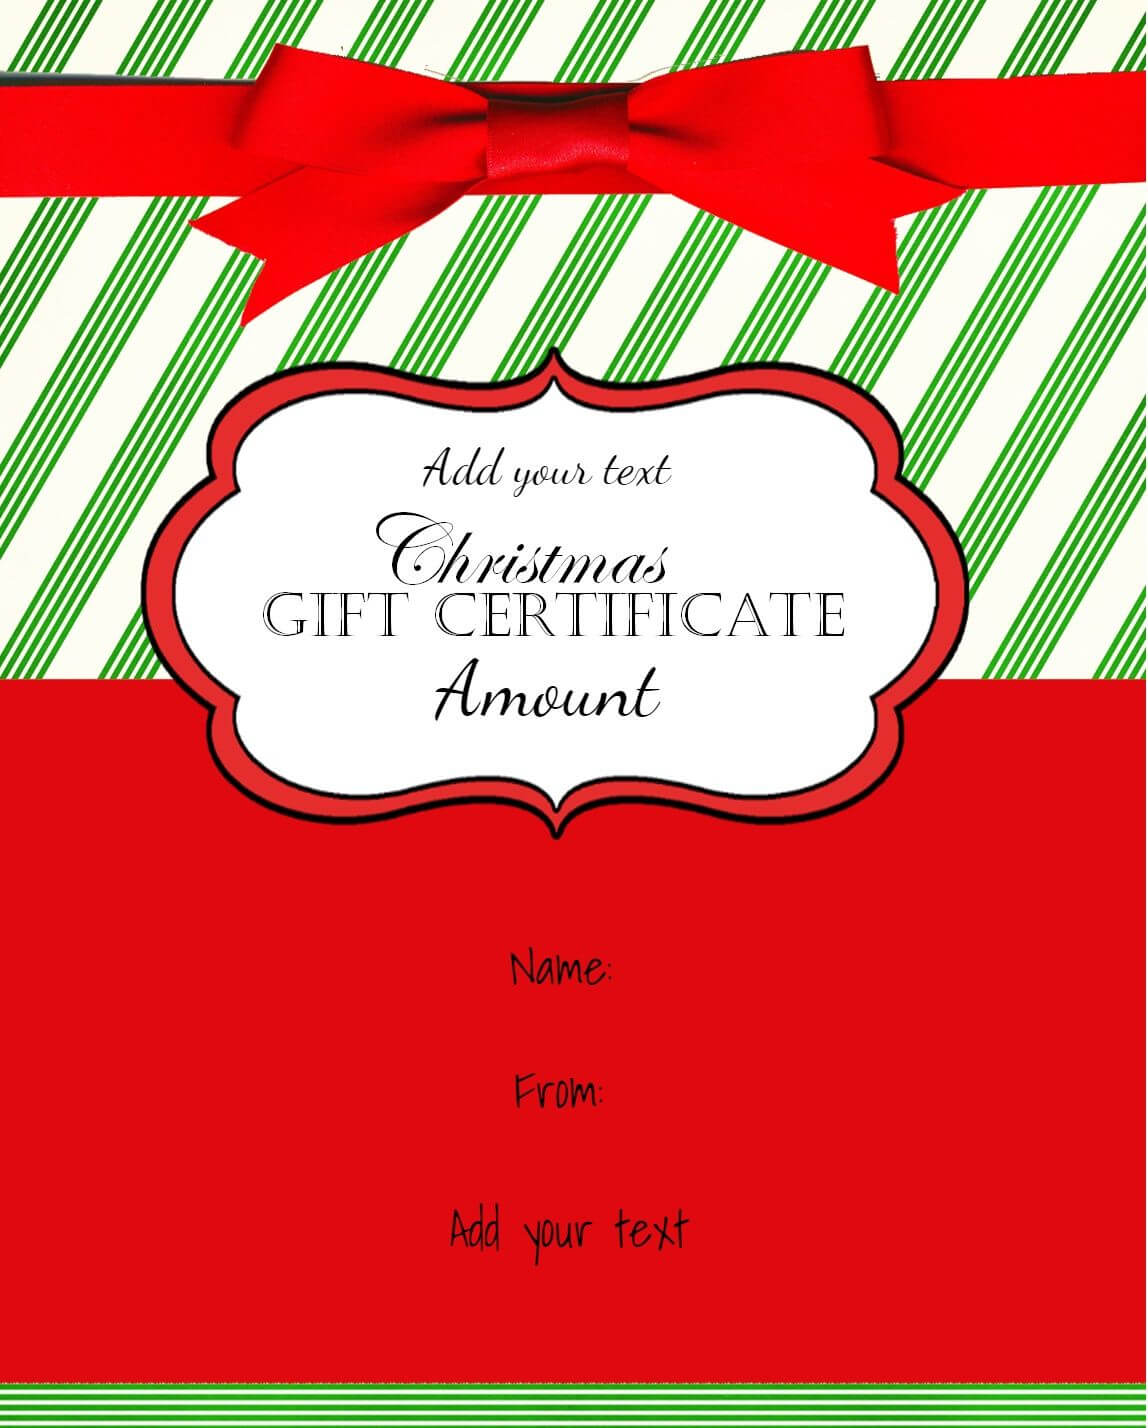 Pinamber M Ross On Gift Ideas | Gift Certificate For Free Christmas Gift Certificate Templates